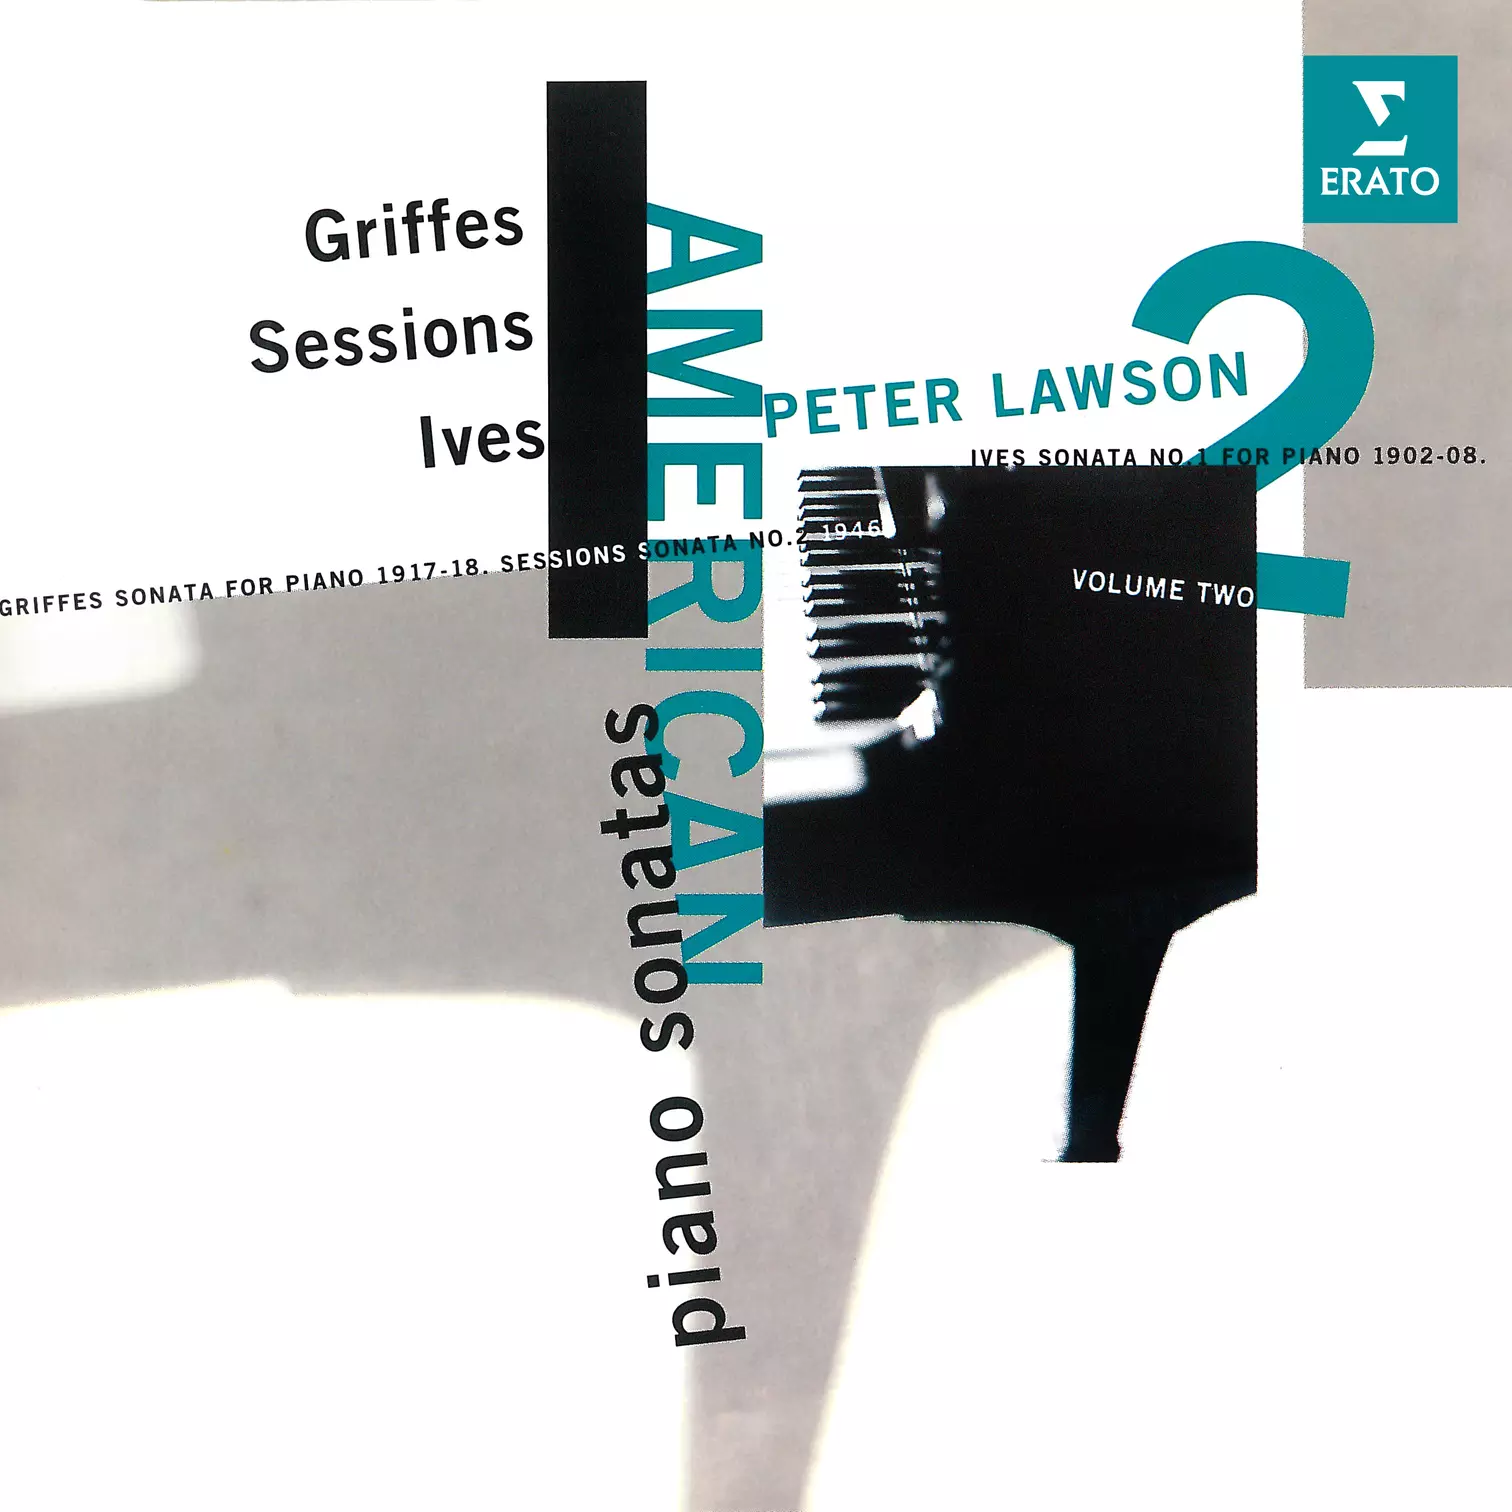 American Piano Sonatas, Vol. 2: Griffes, Sessions, Ives